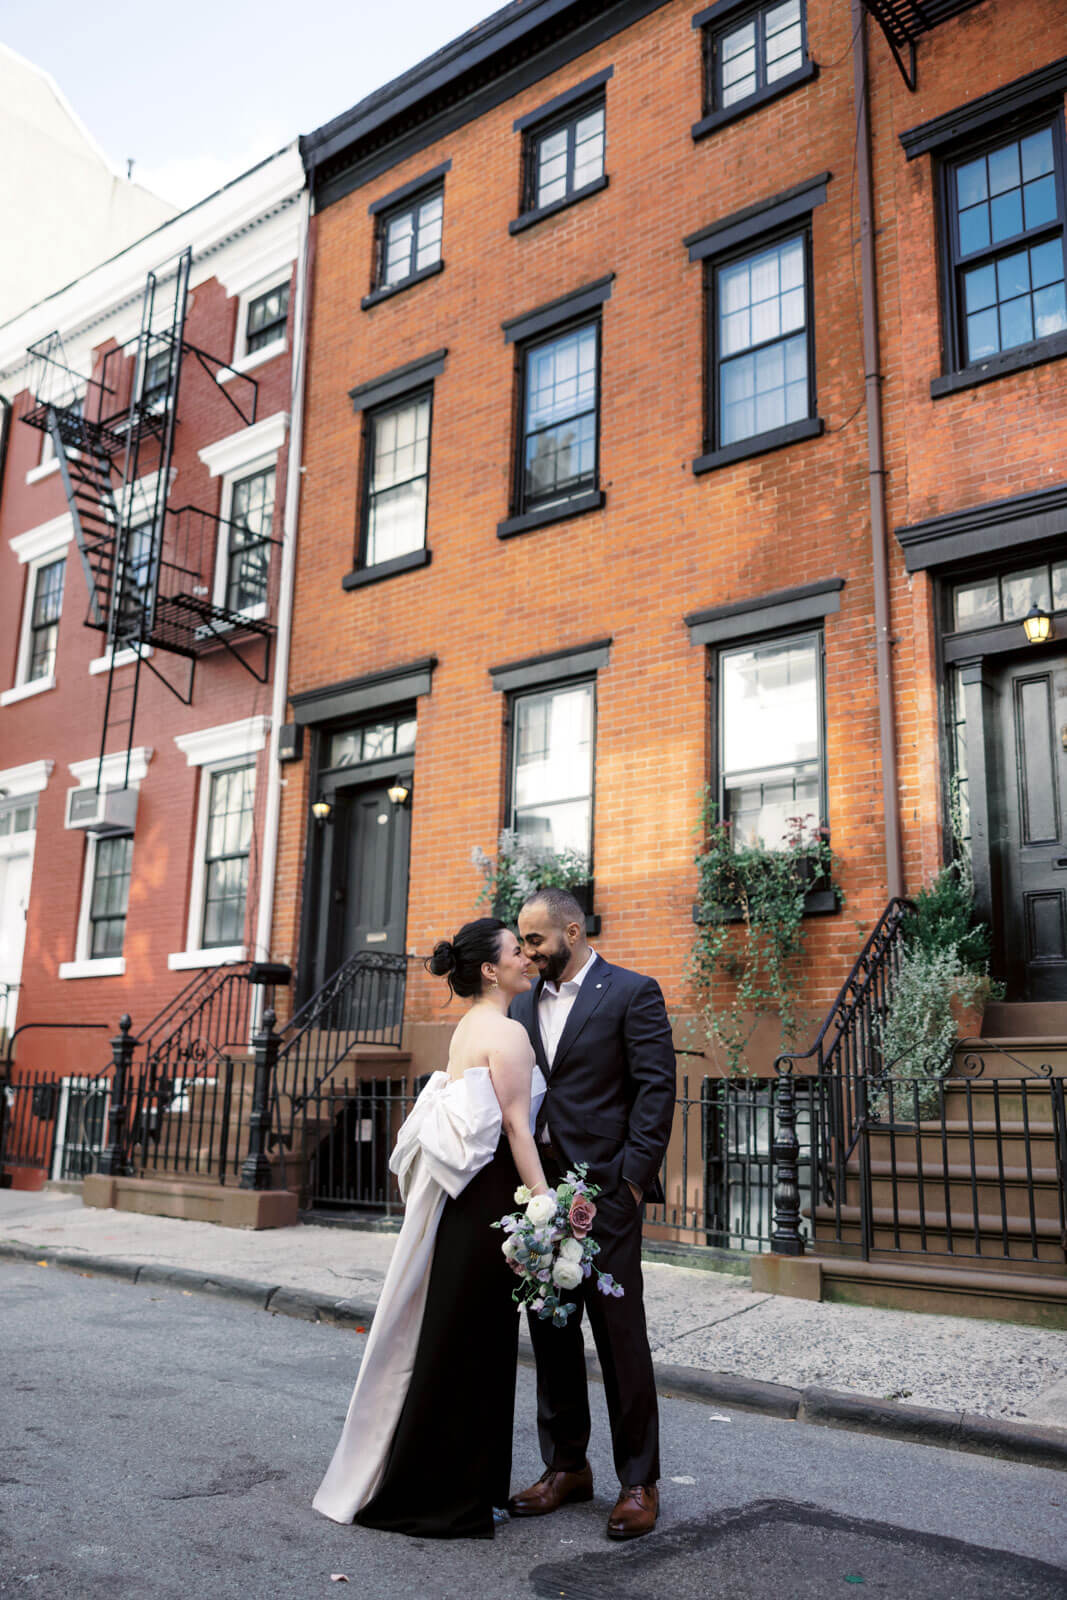 The engaged couple is standing close in front of a townhouse. Engagement photo location at West Village, NYC.